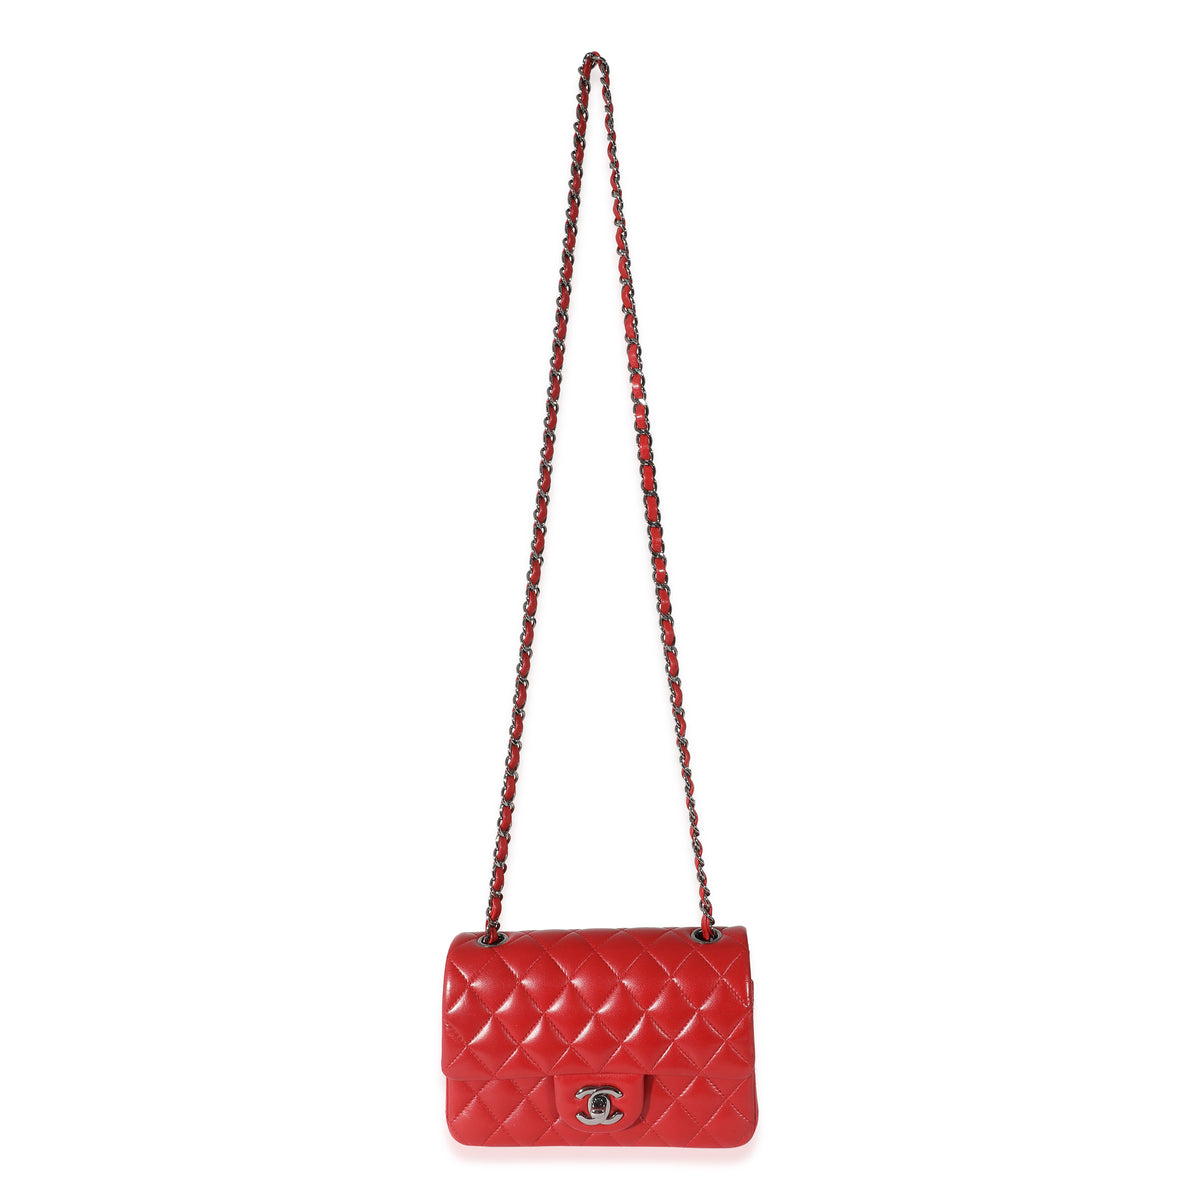 Chanel Classic Mini Flap Quilted Lambskin Bag in Red